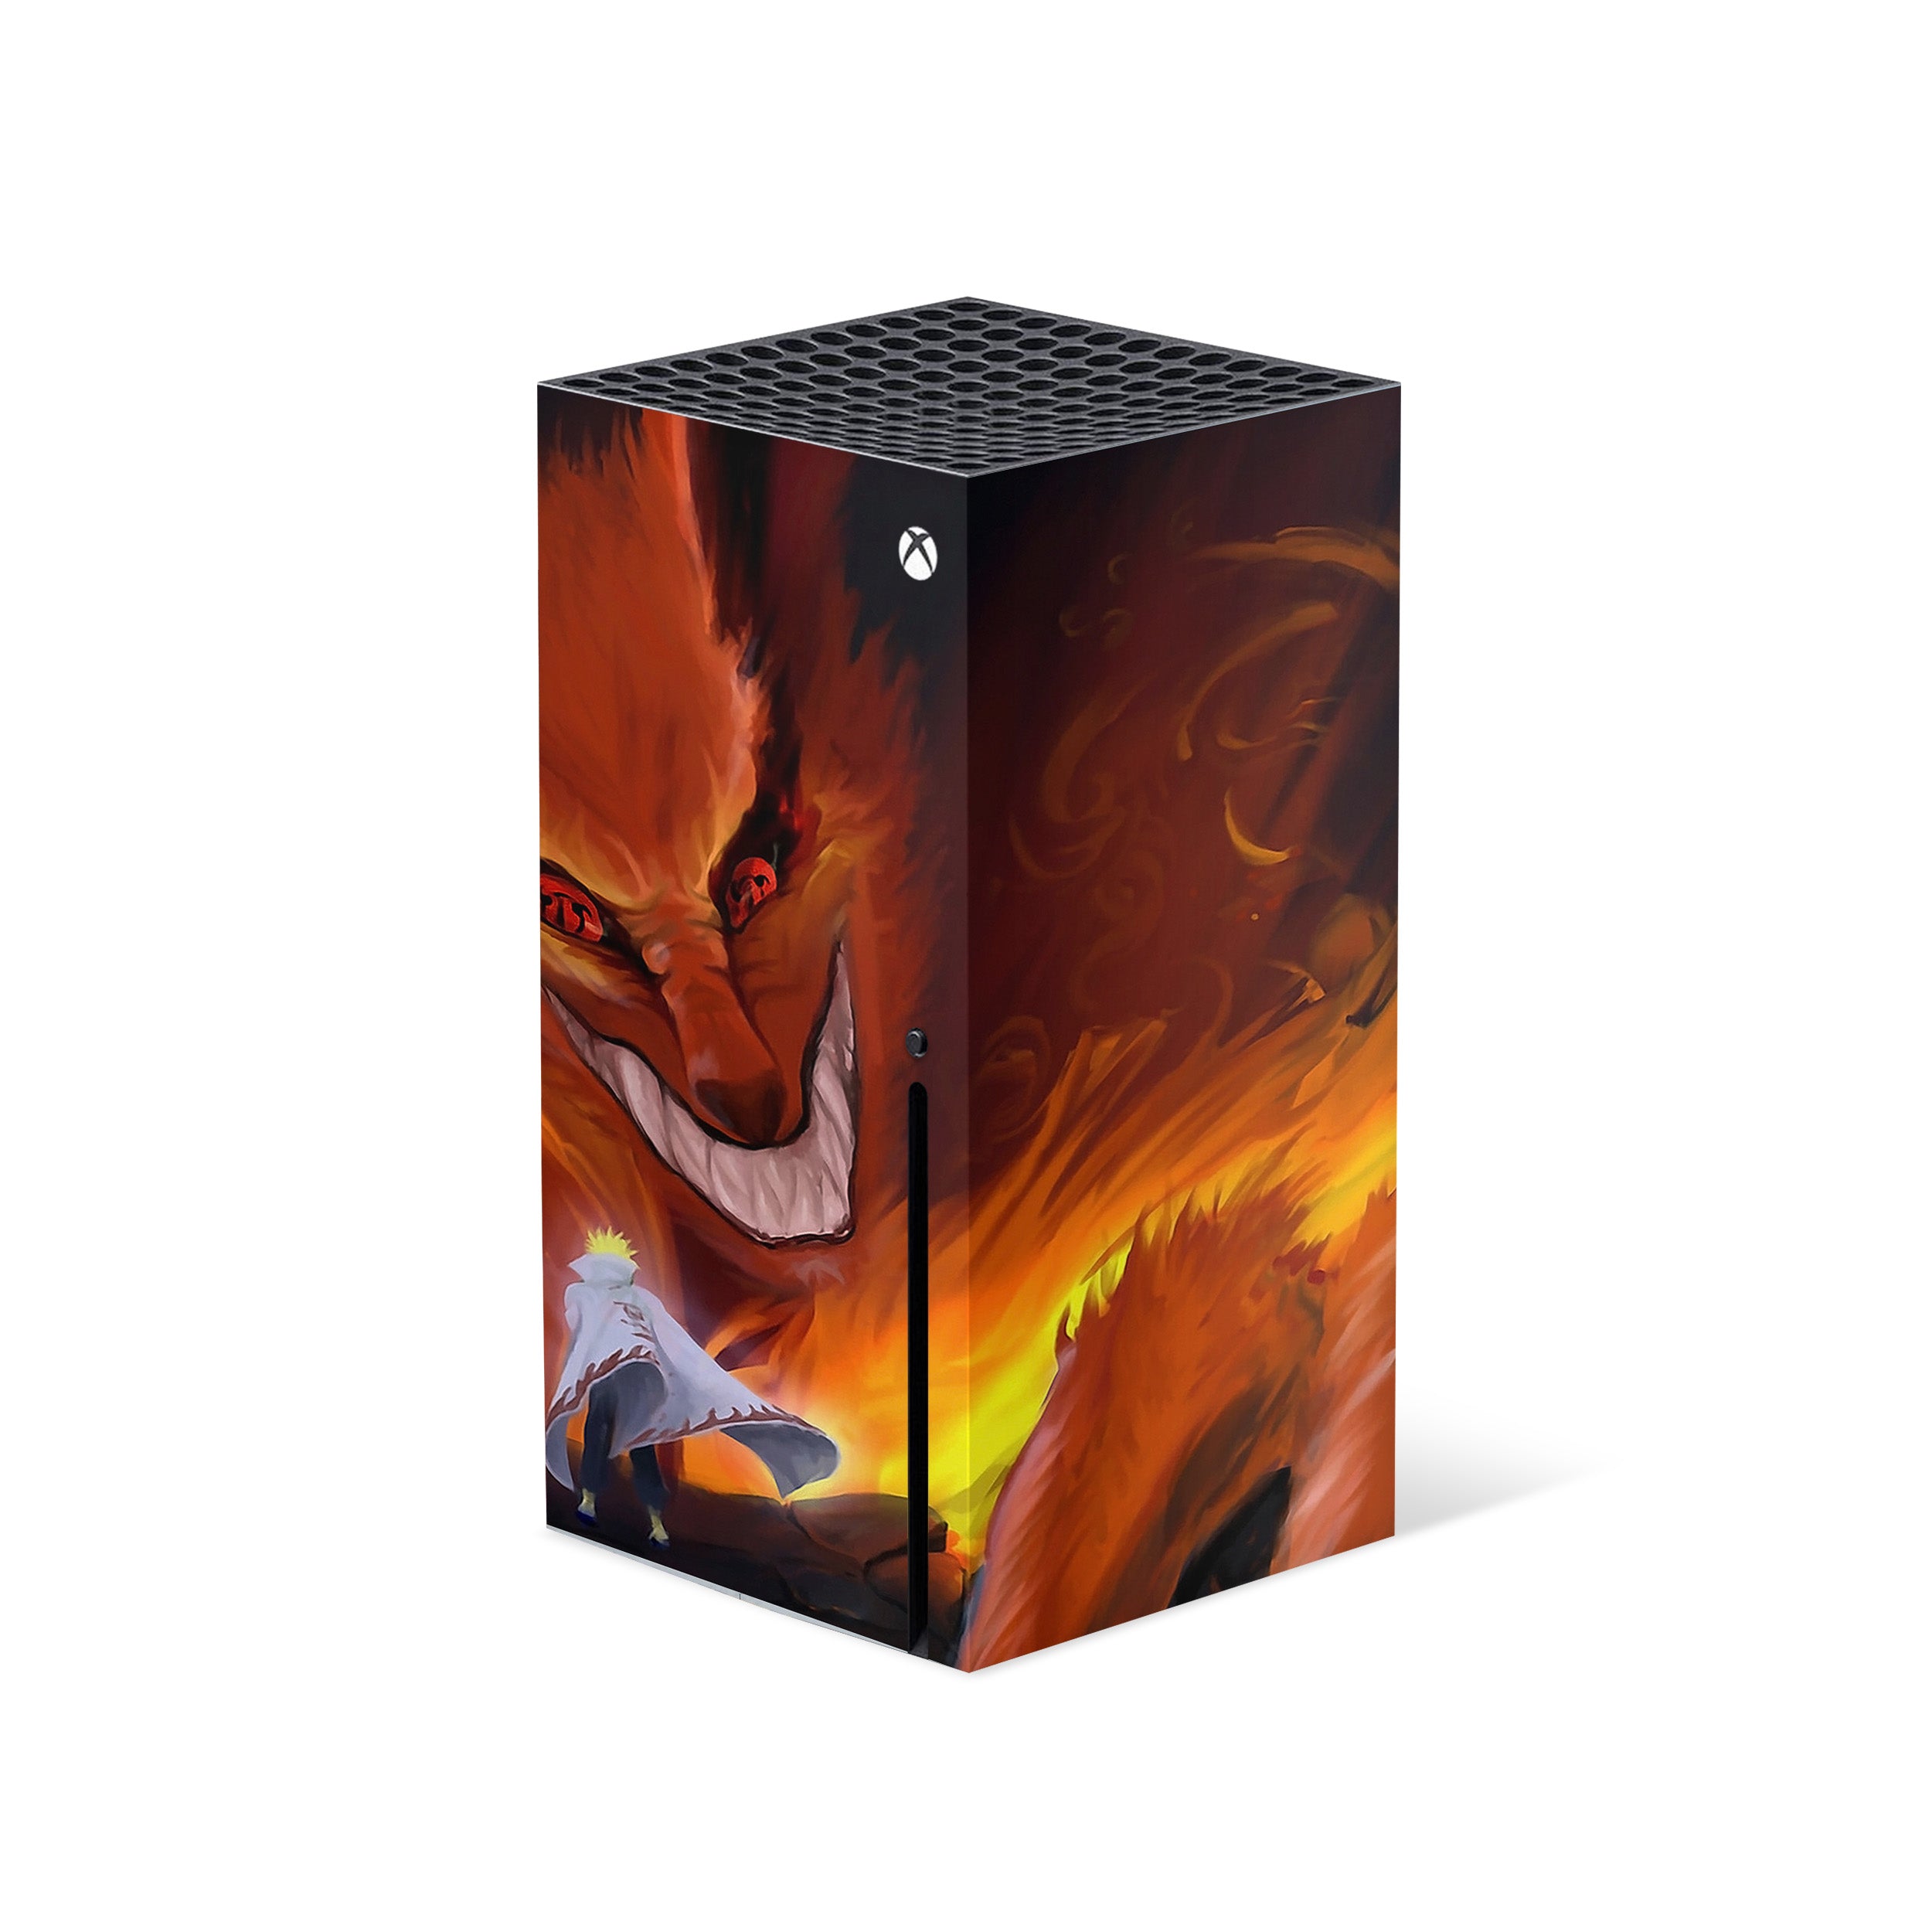 A video game skin featuring a Naruto Fire Wolf design for the Xbox Series X.